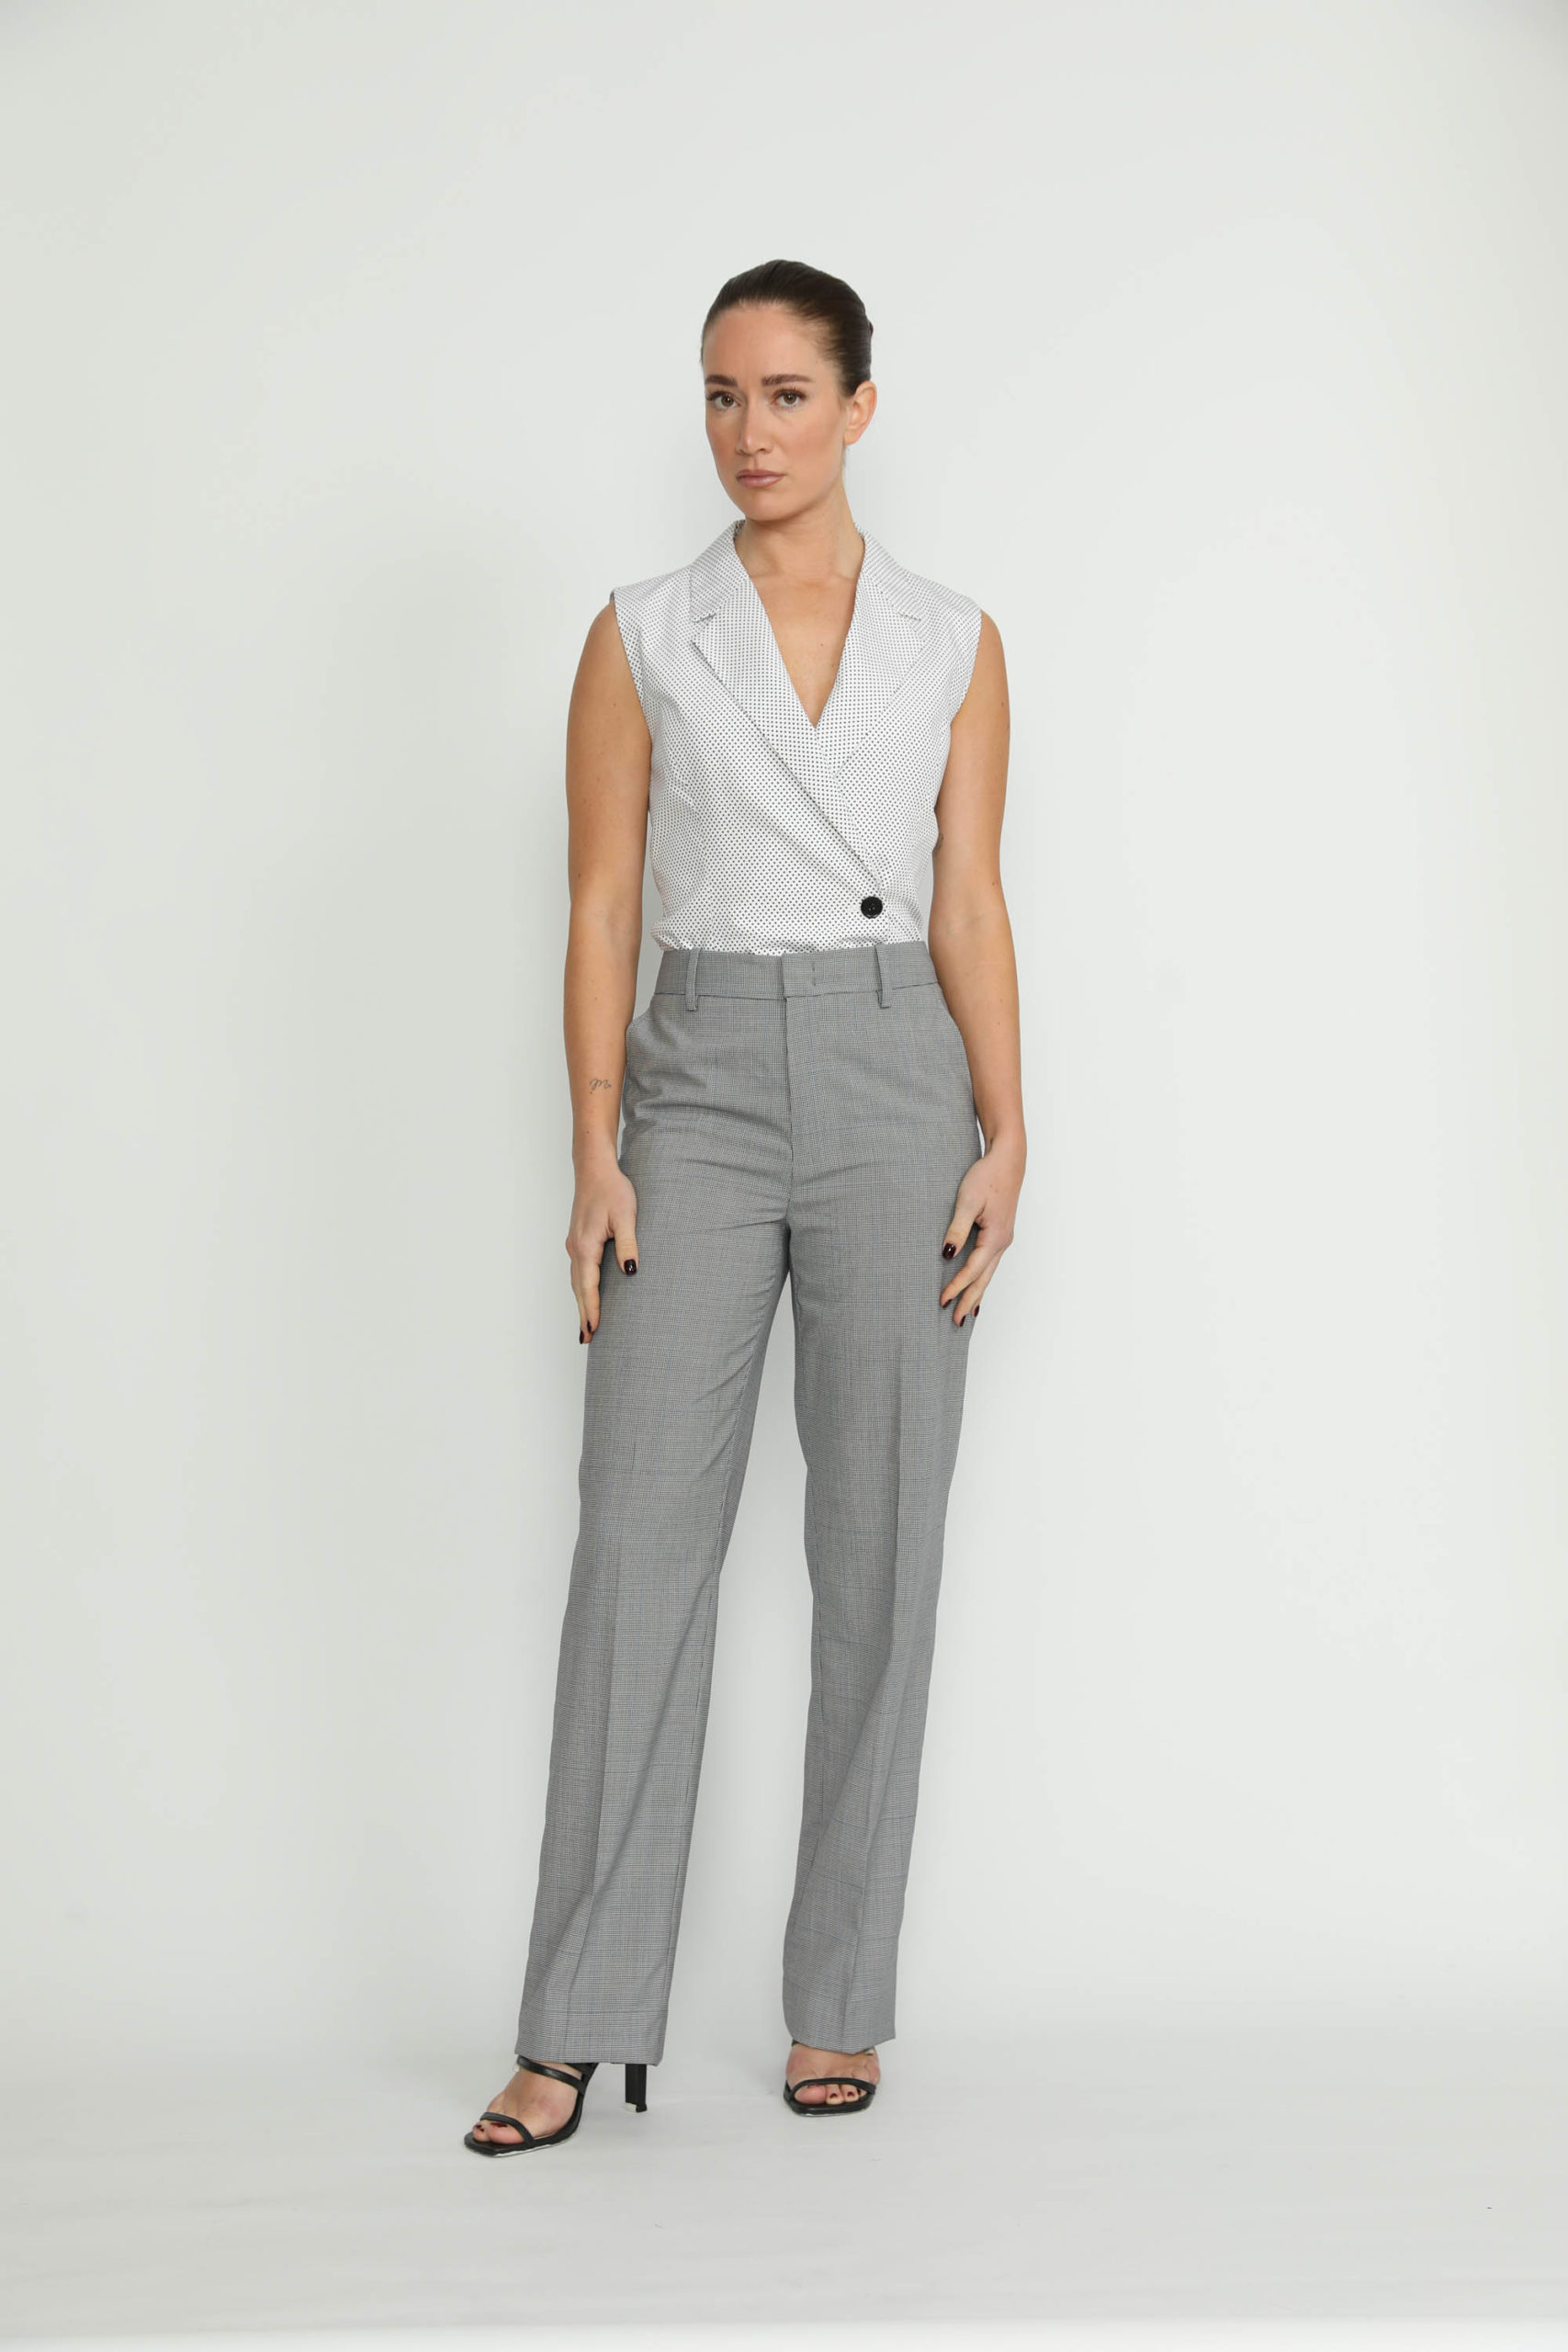 Elvas Trousers – Elvas Fitted Black/White Mini Houndstooth Trousers